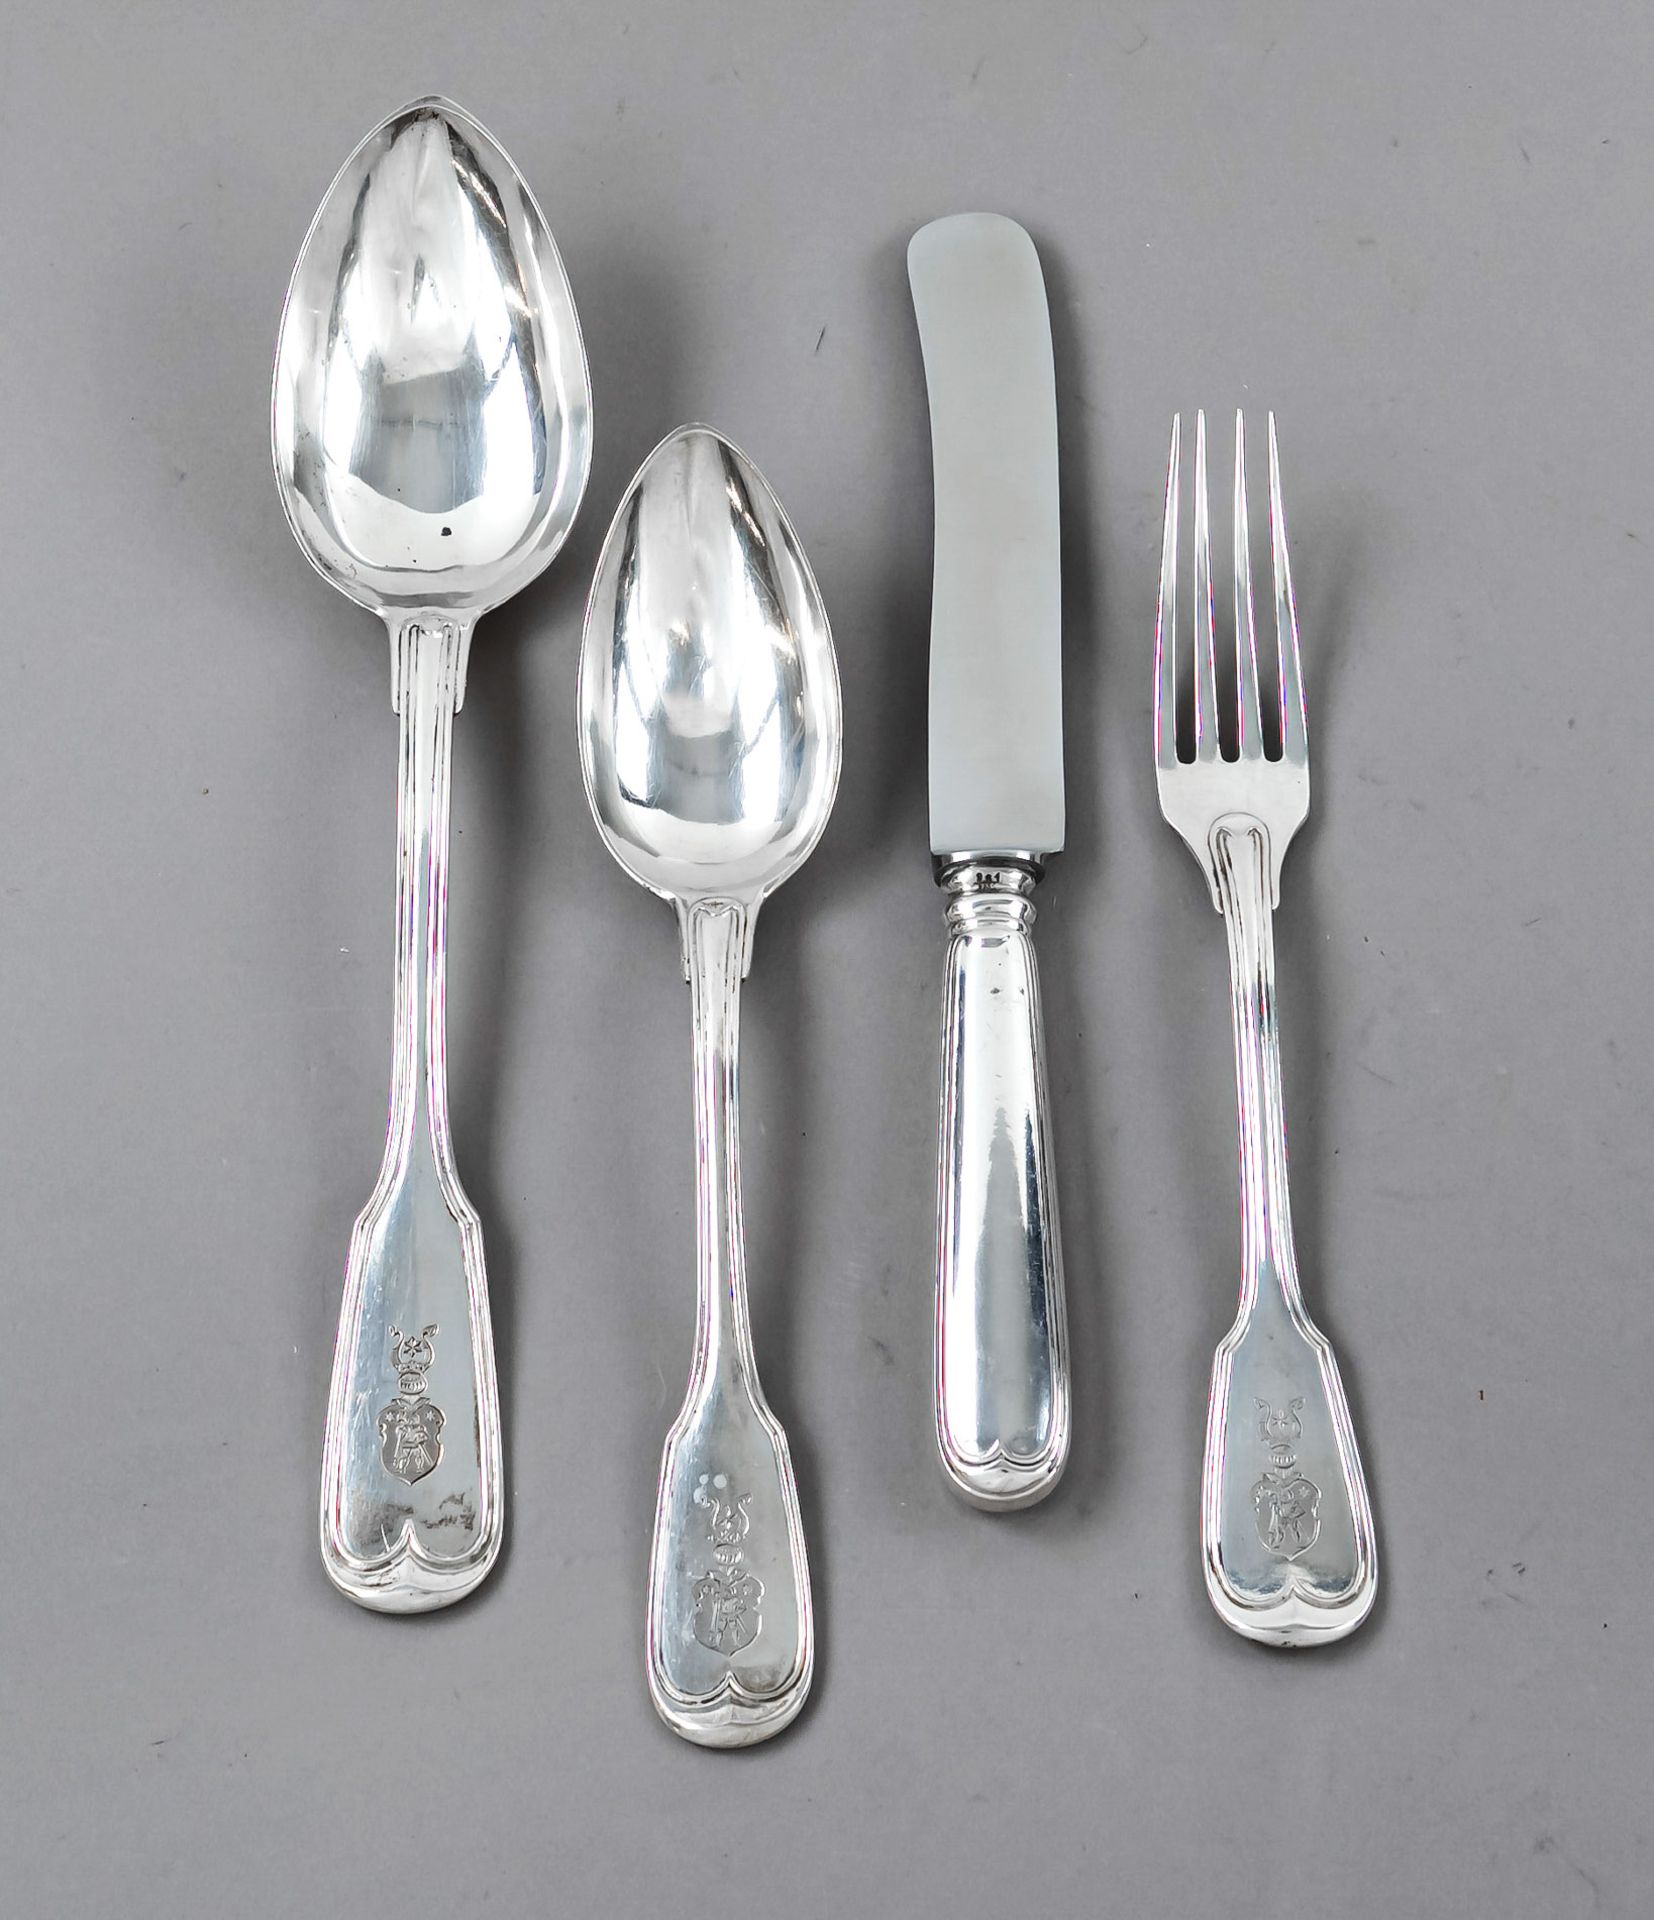 19-piece dinner set for 6 persons, German, around 1900, jeweler's mark Frey & Söhne, silver 750/000,